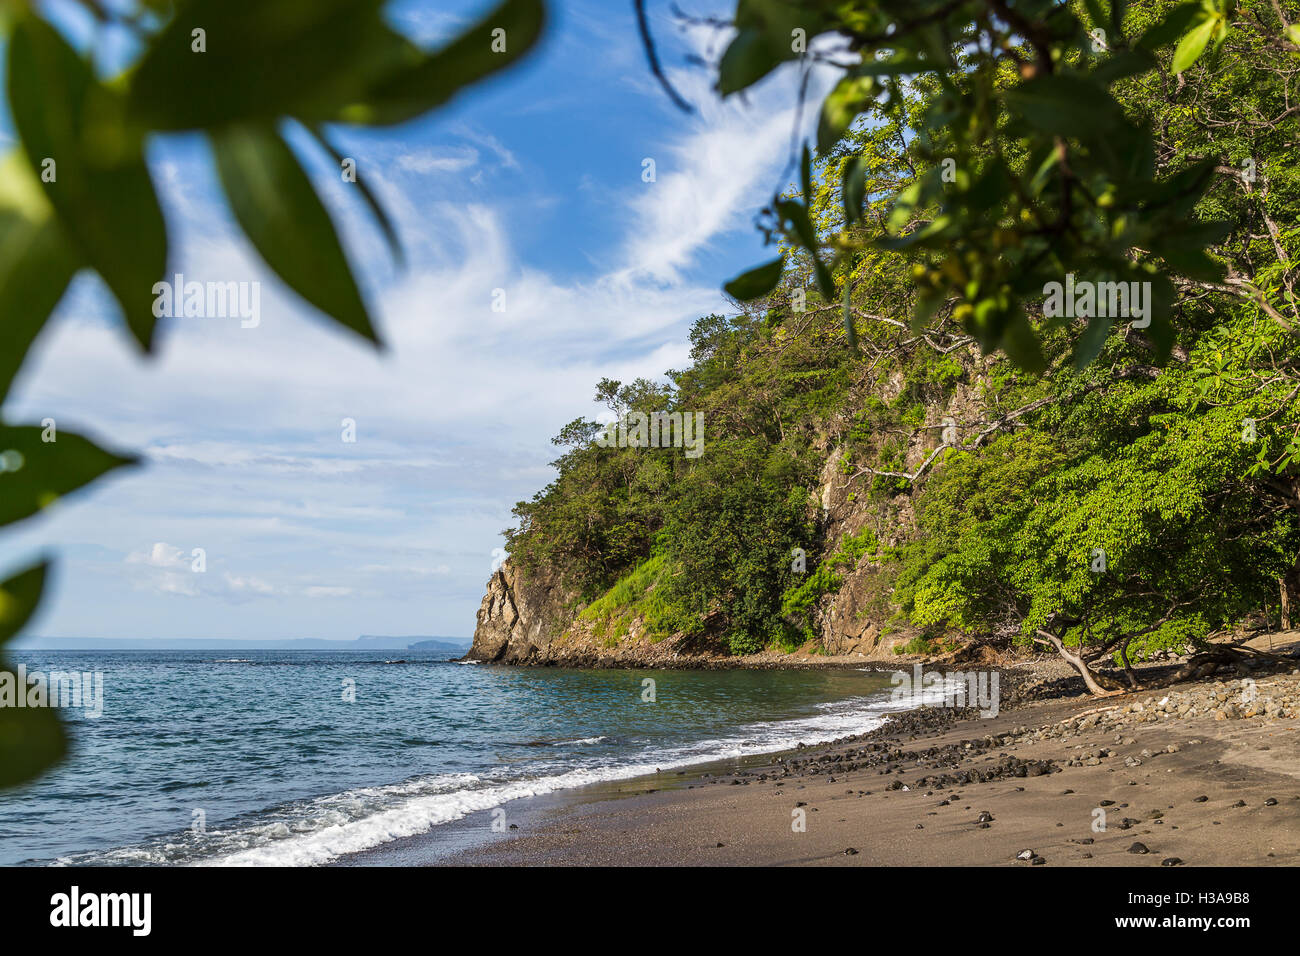 Rugged coastline of Guanacaste framed by lush green leaves in Costa Rica. Stock Photo